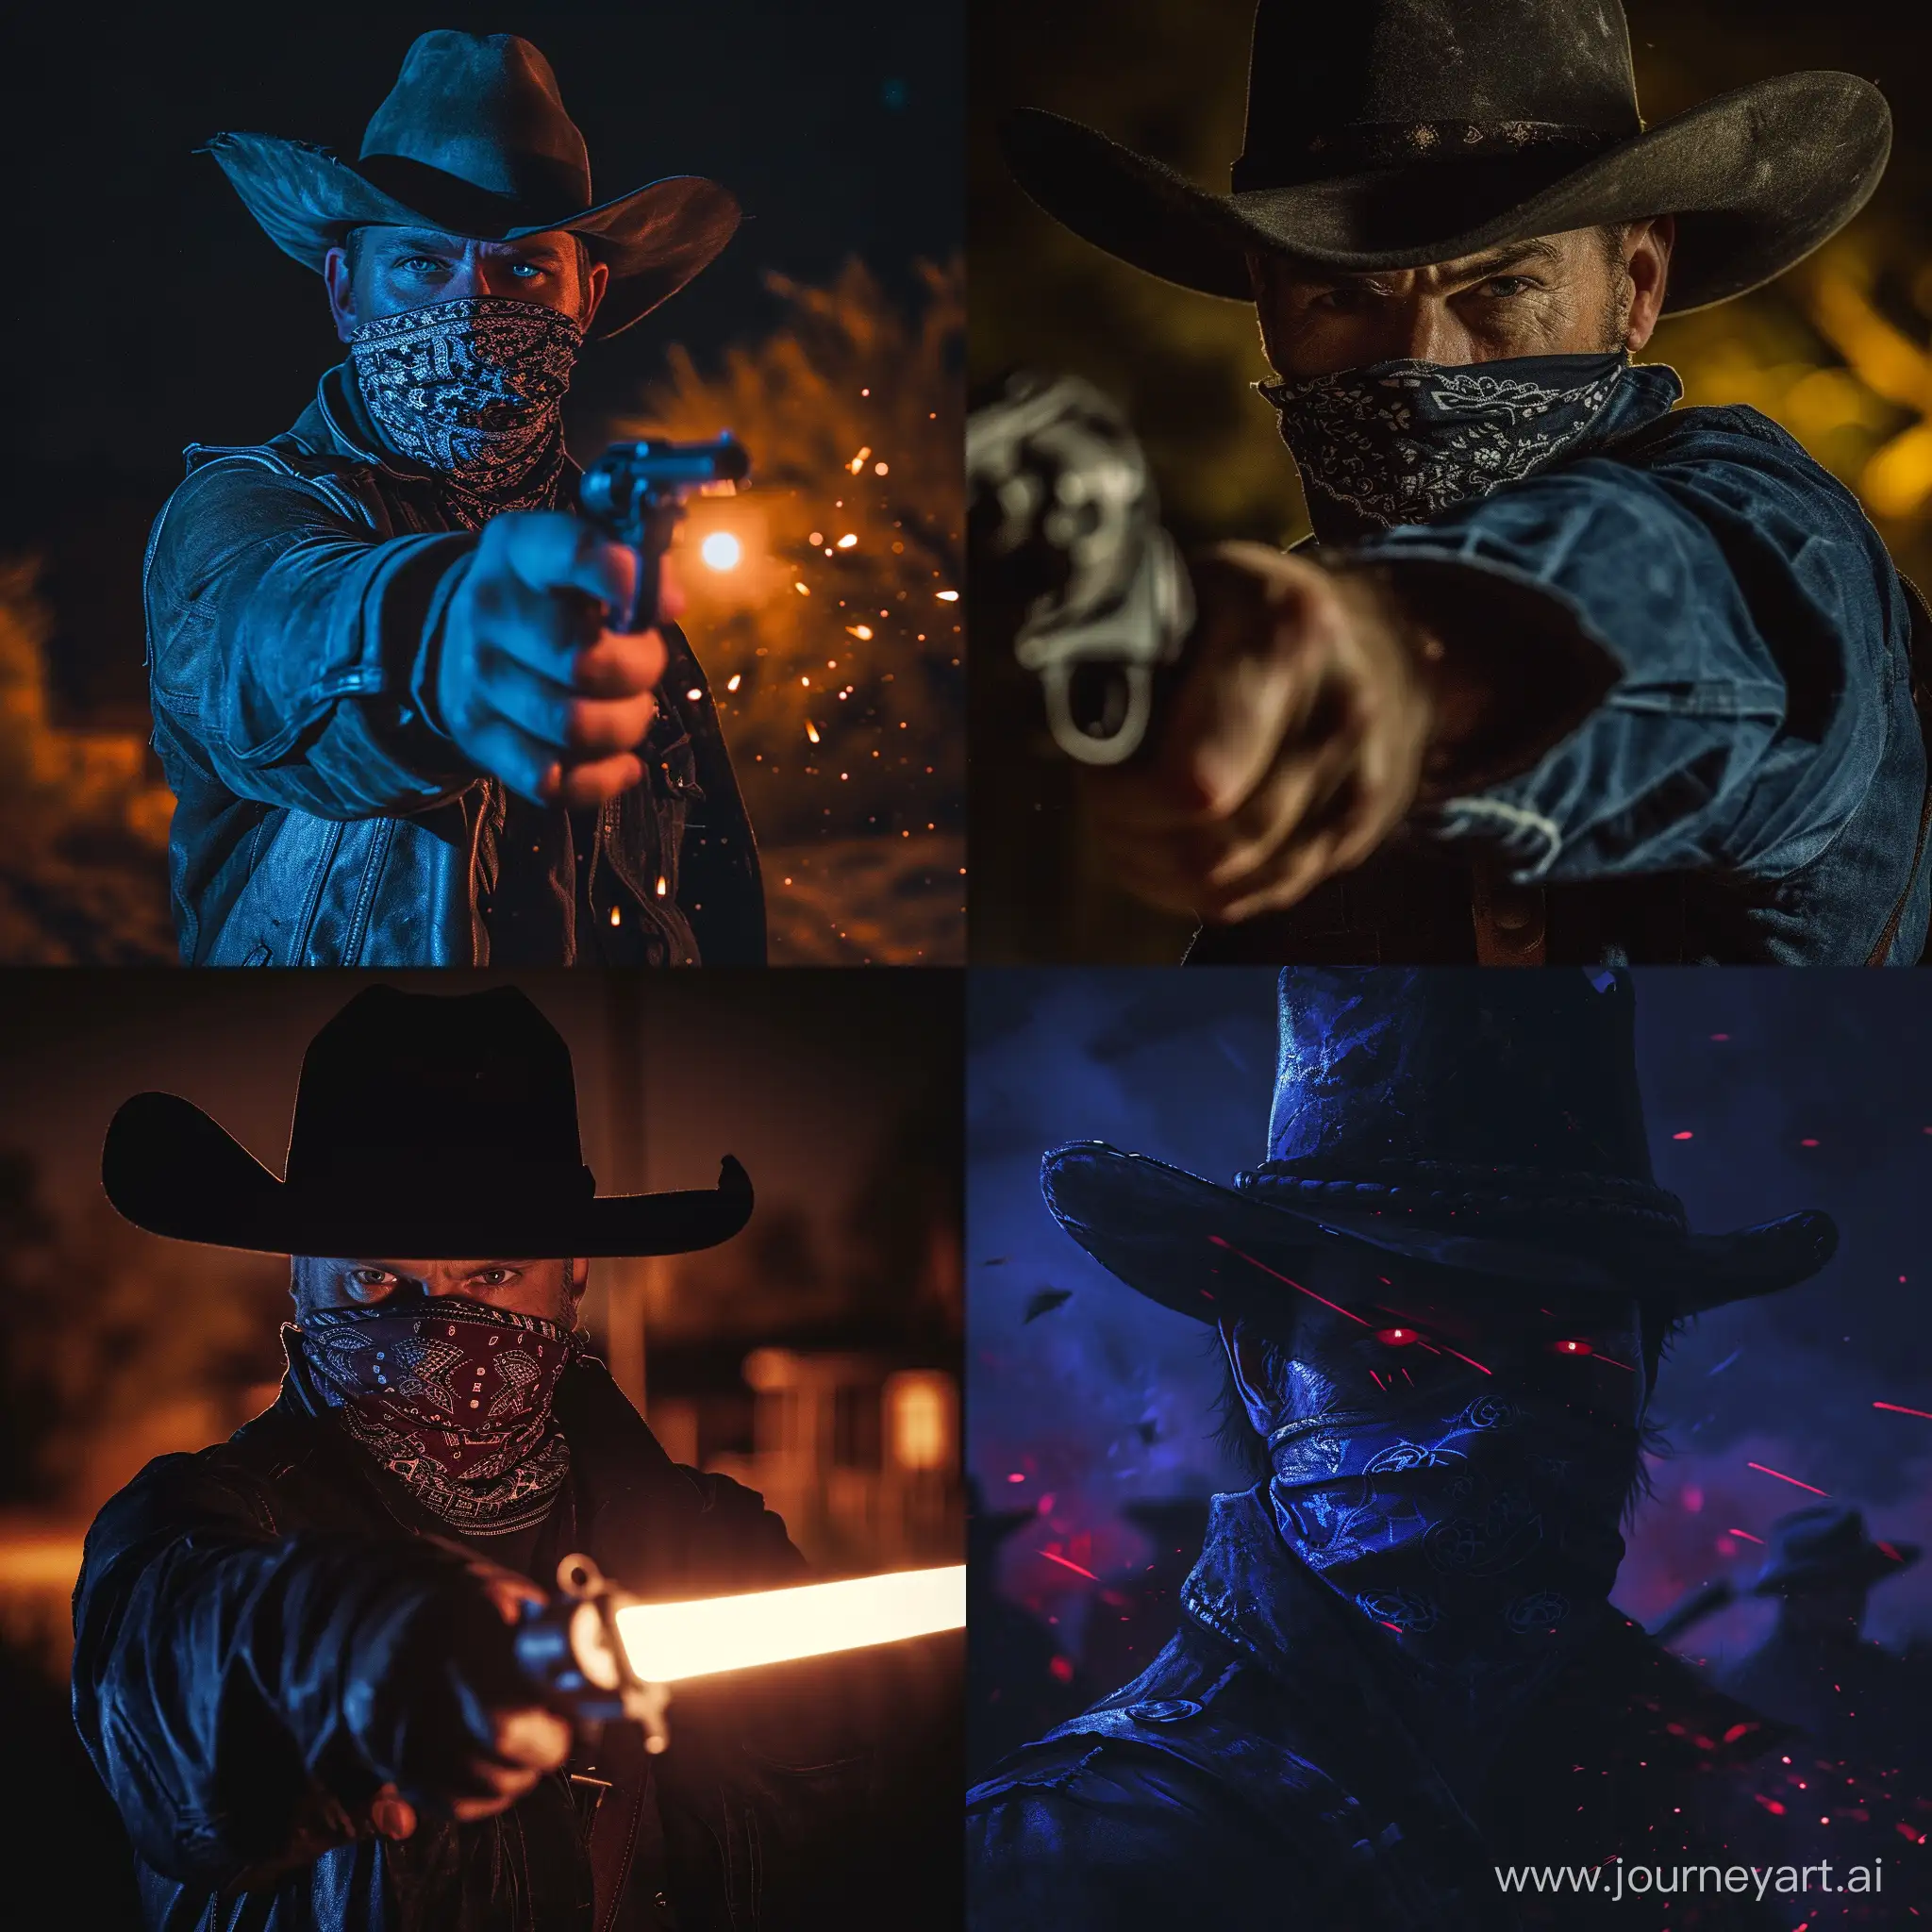 Masked-Cowboy-Confronts-Bandits-in-the-Night